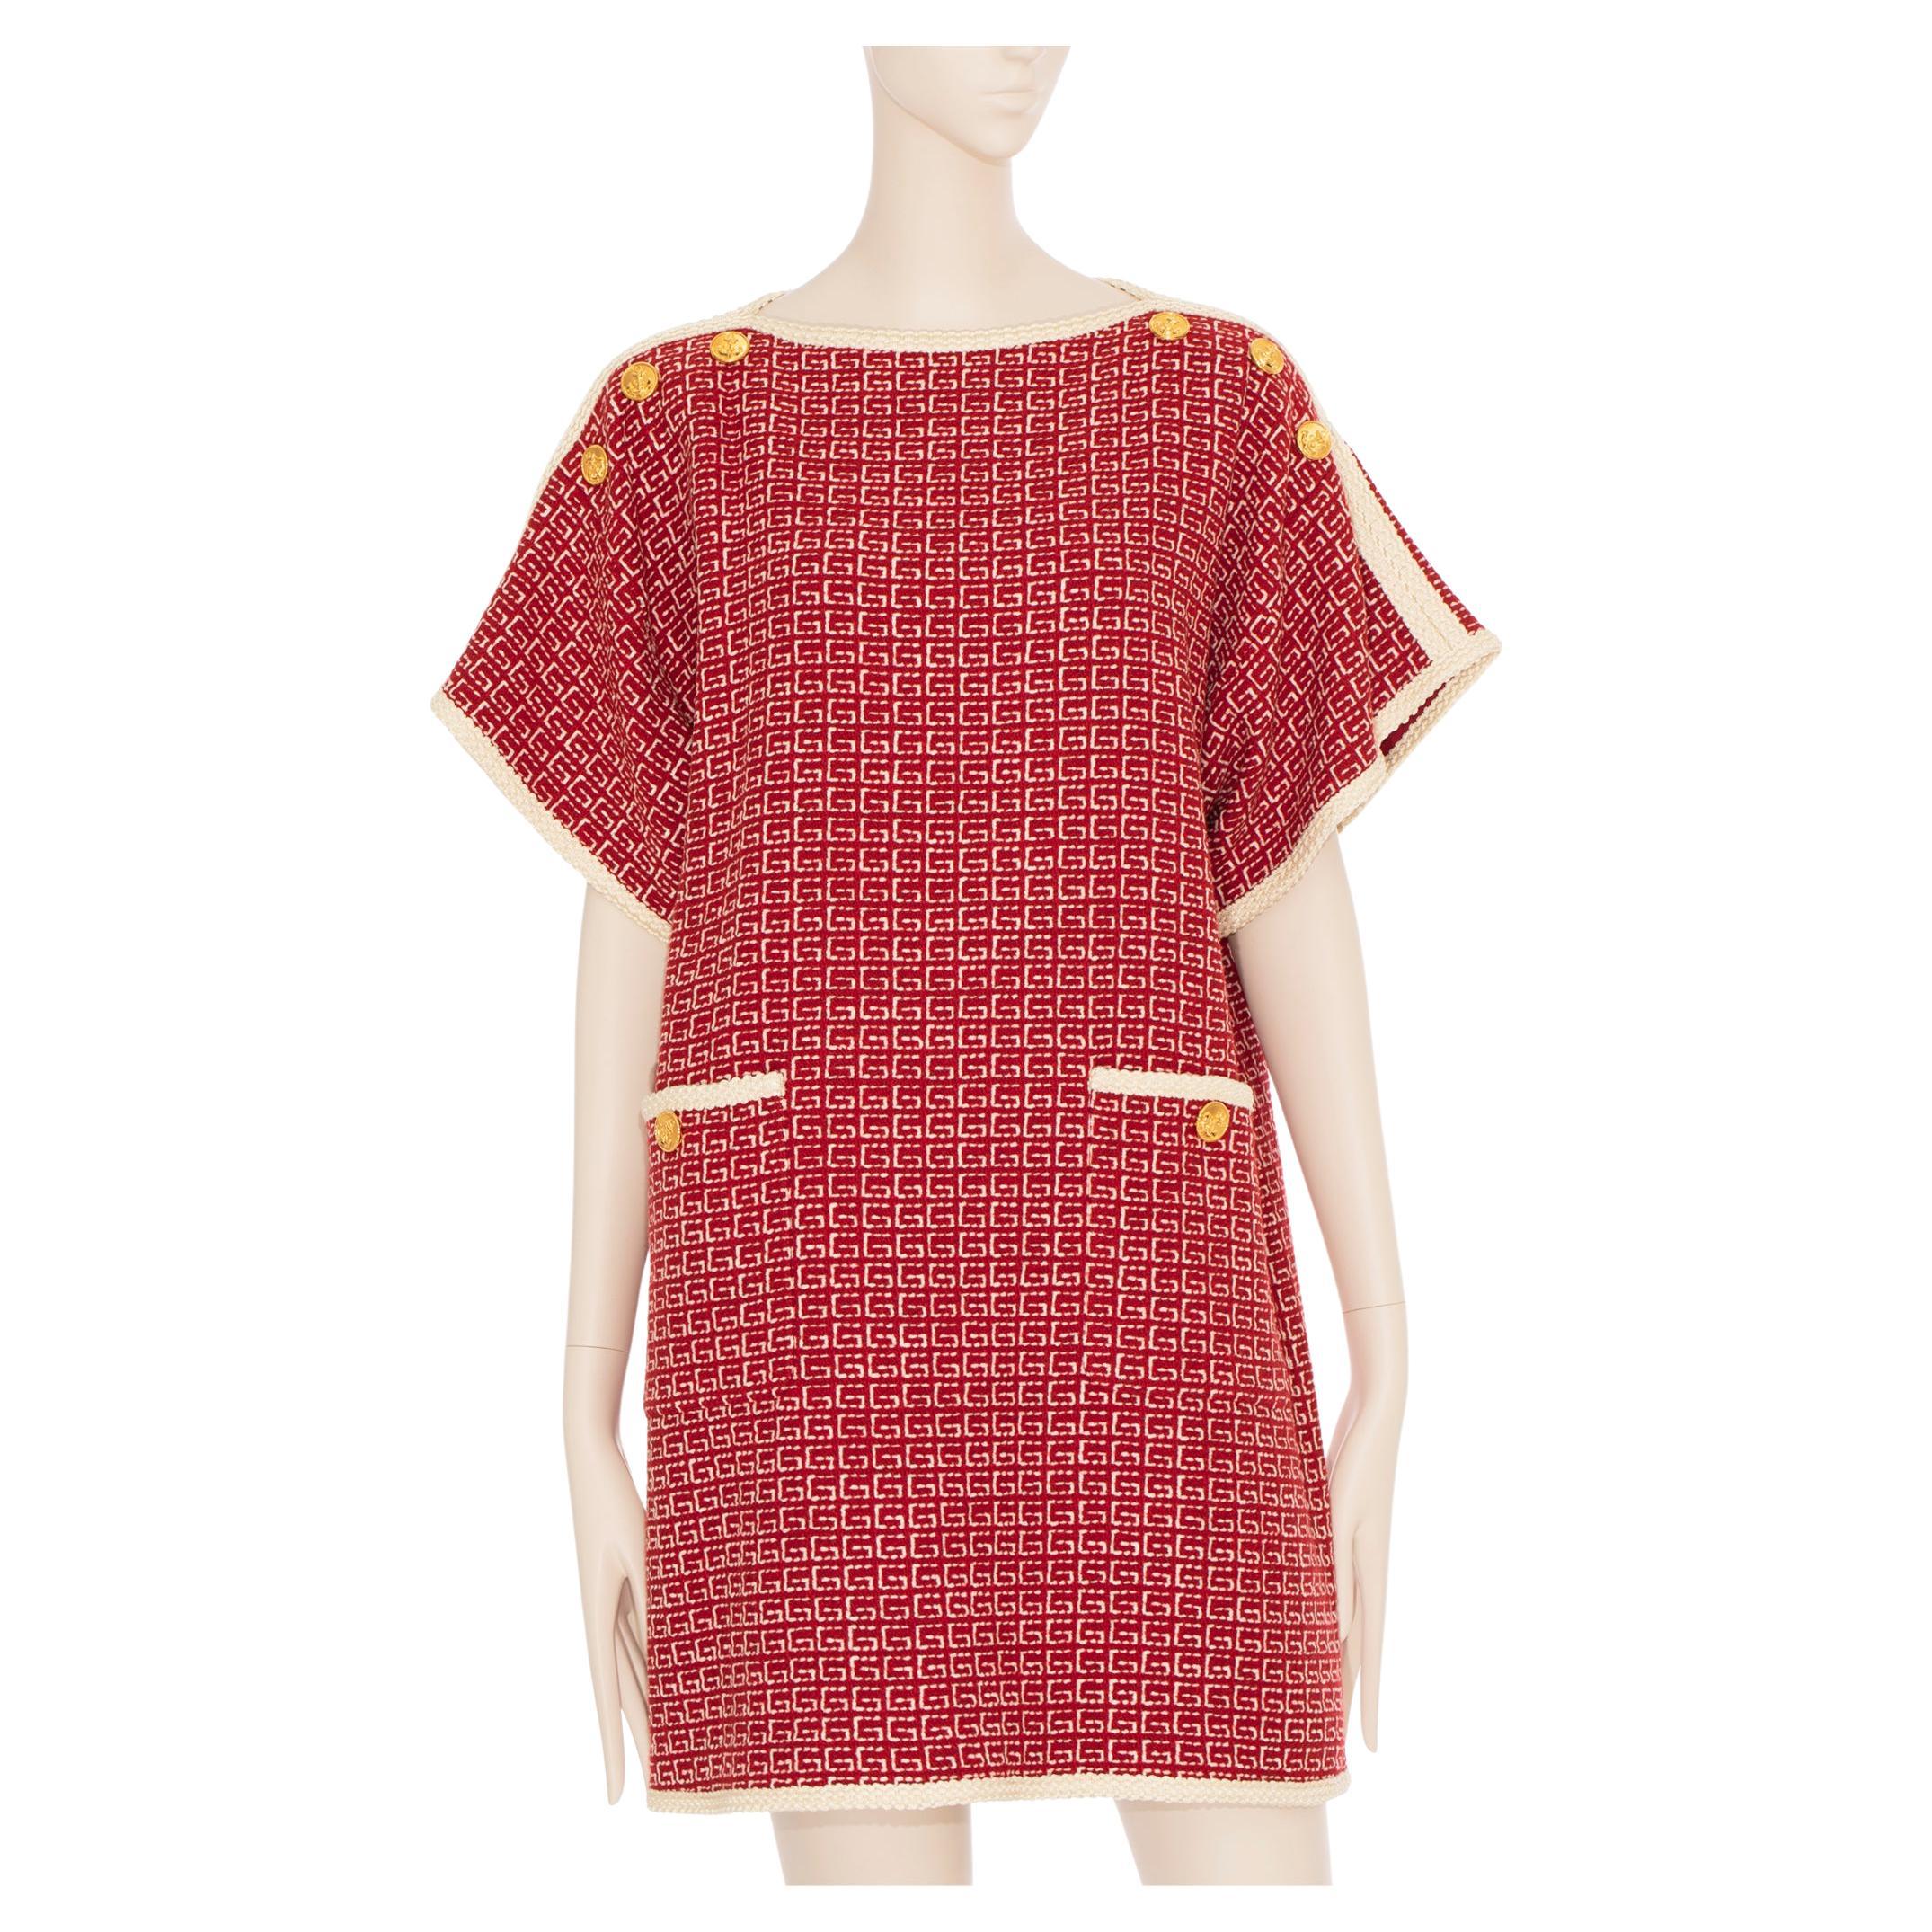 Gucci Tweed Red & Off-White Tunic Dress 38 IT